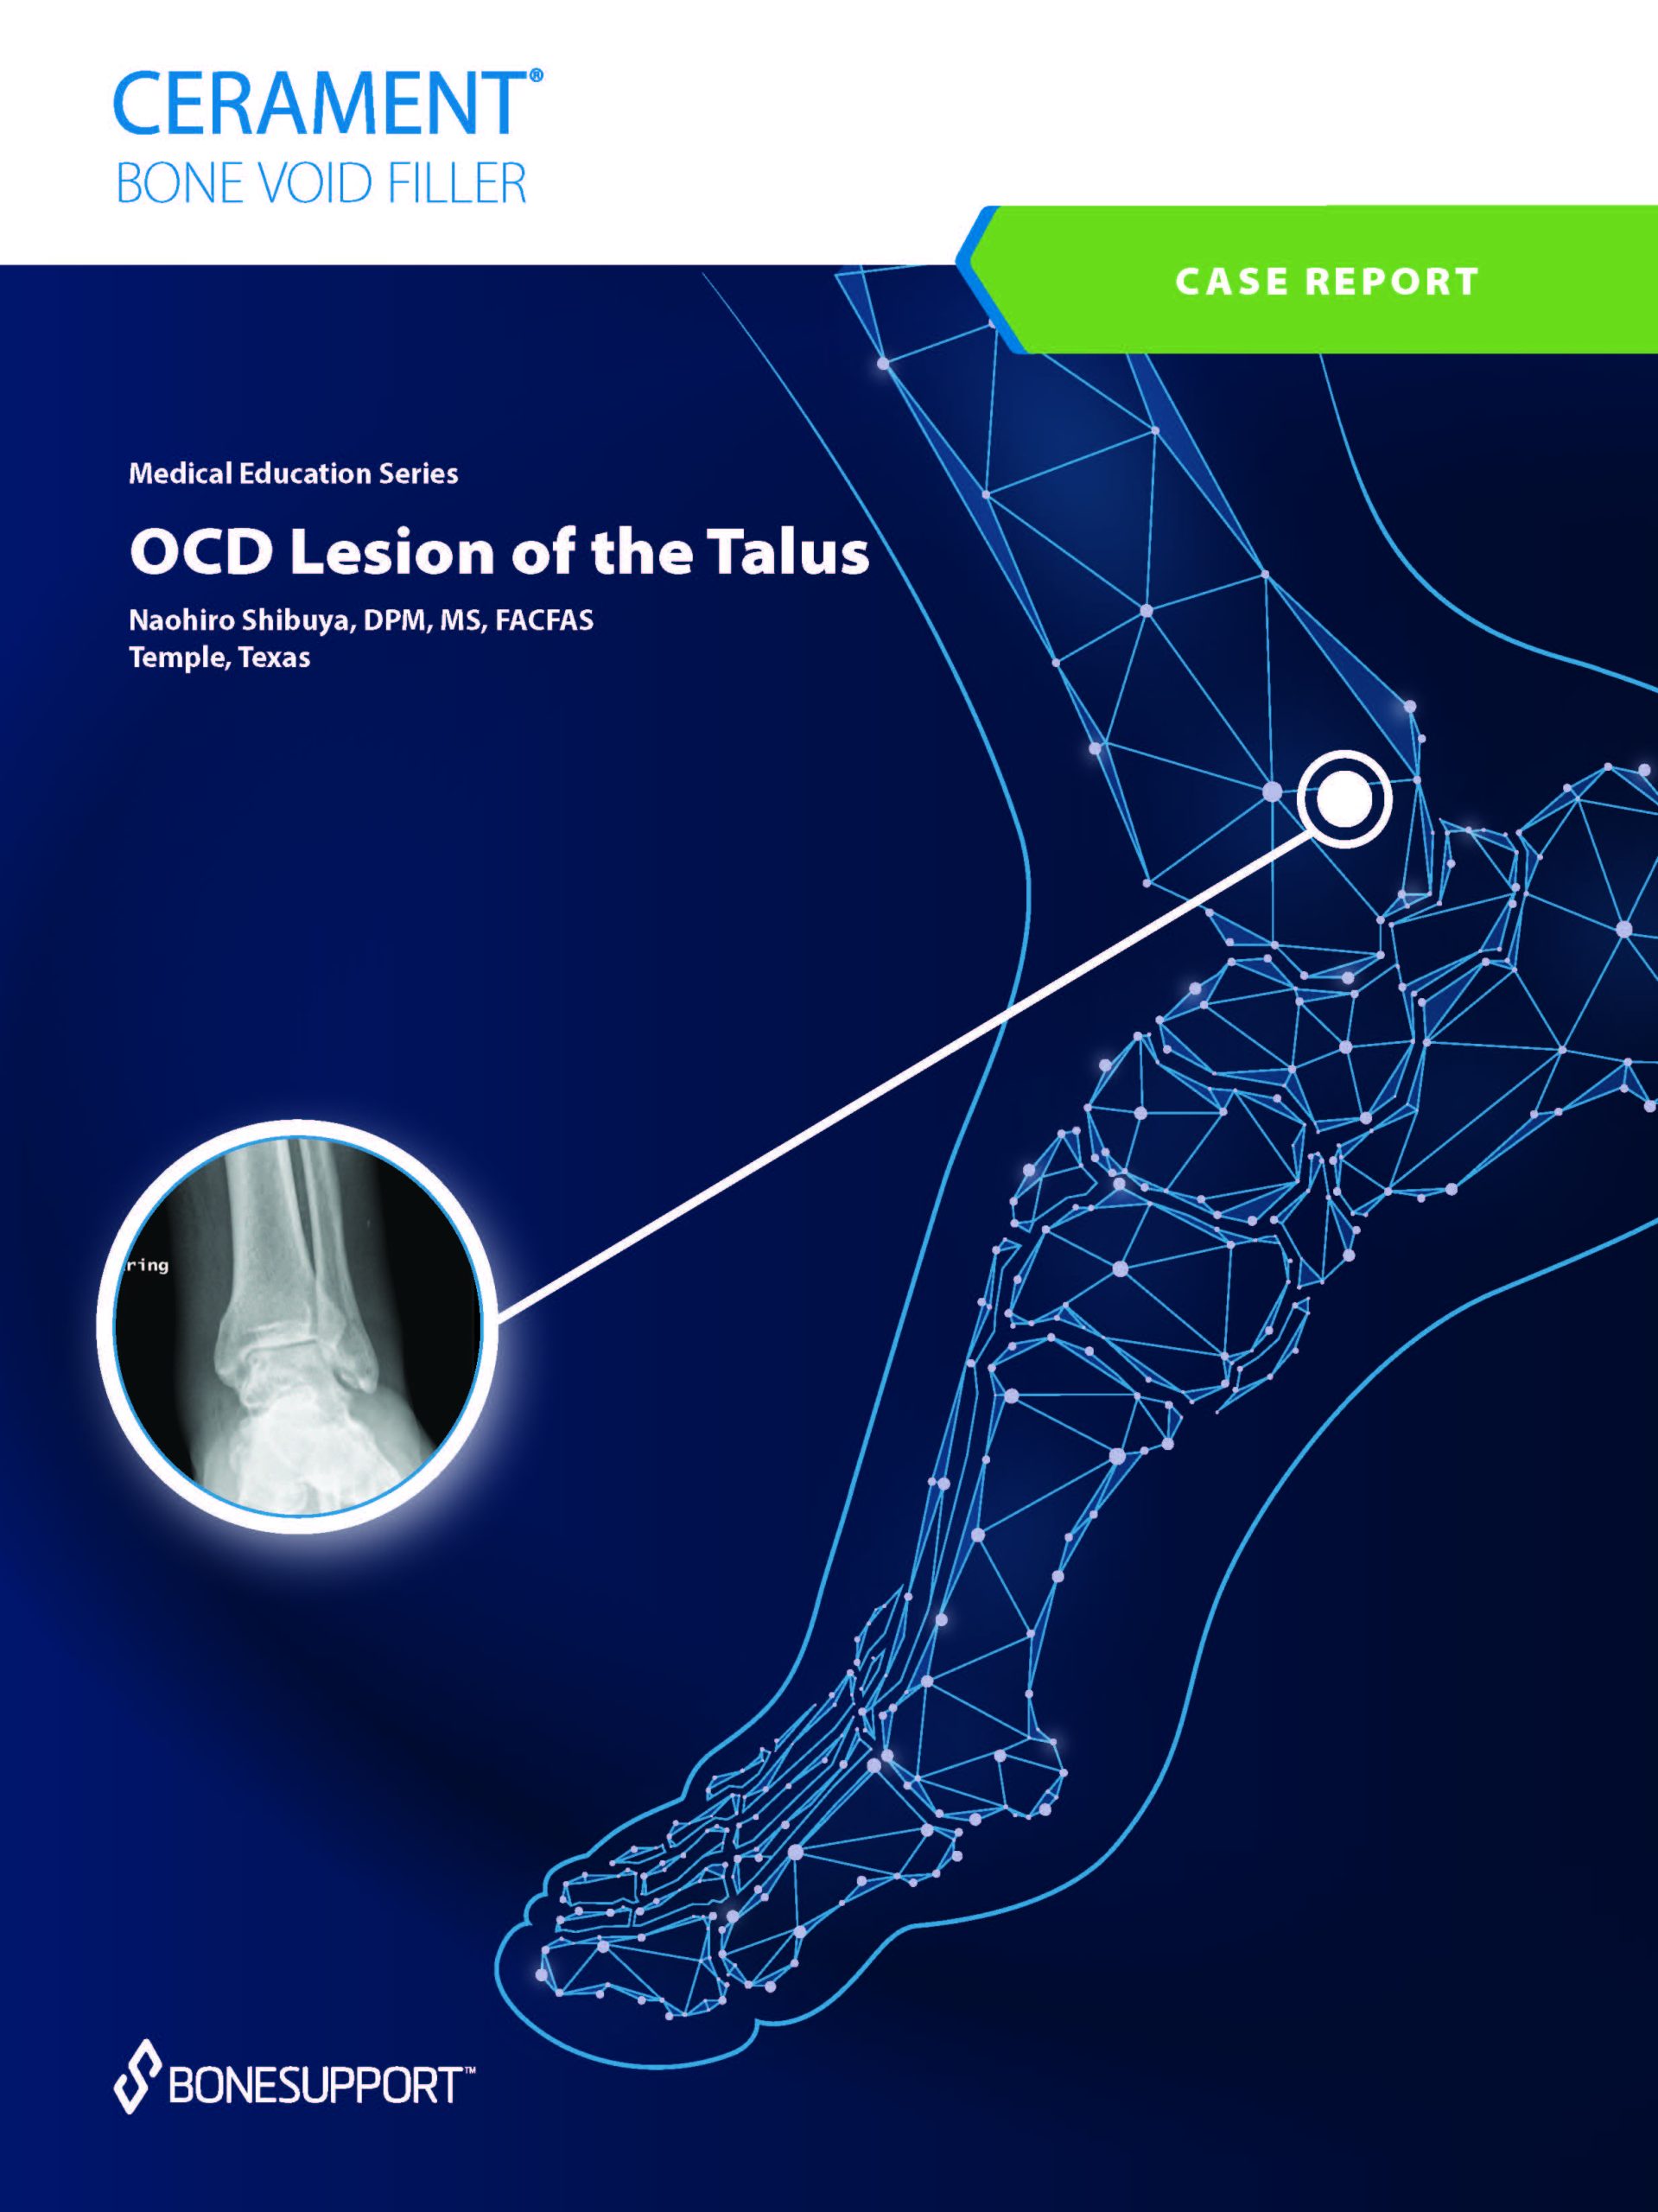 OCD Lesion of the Talus